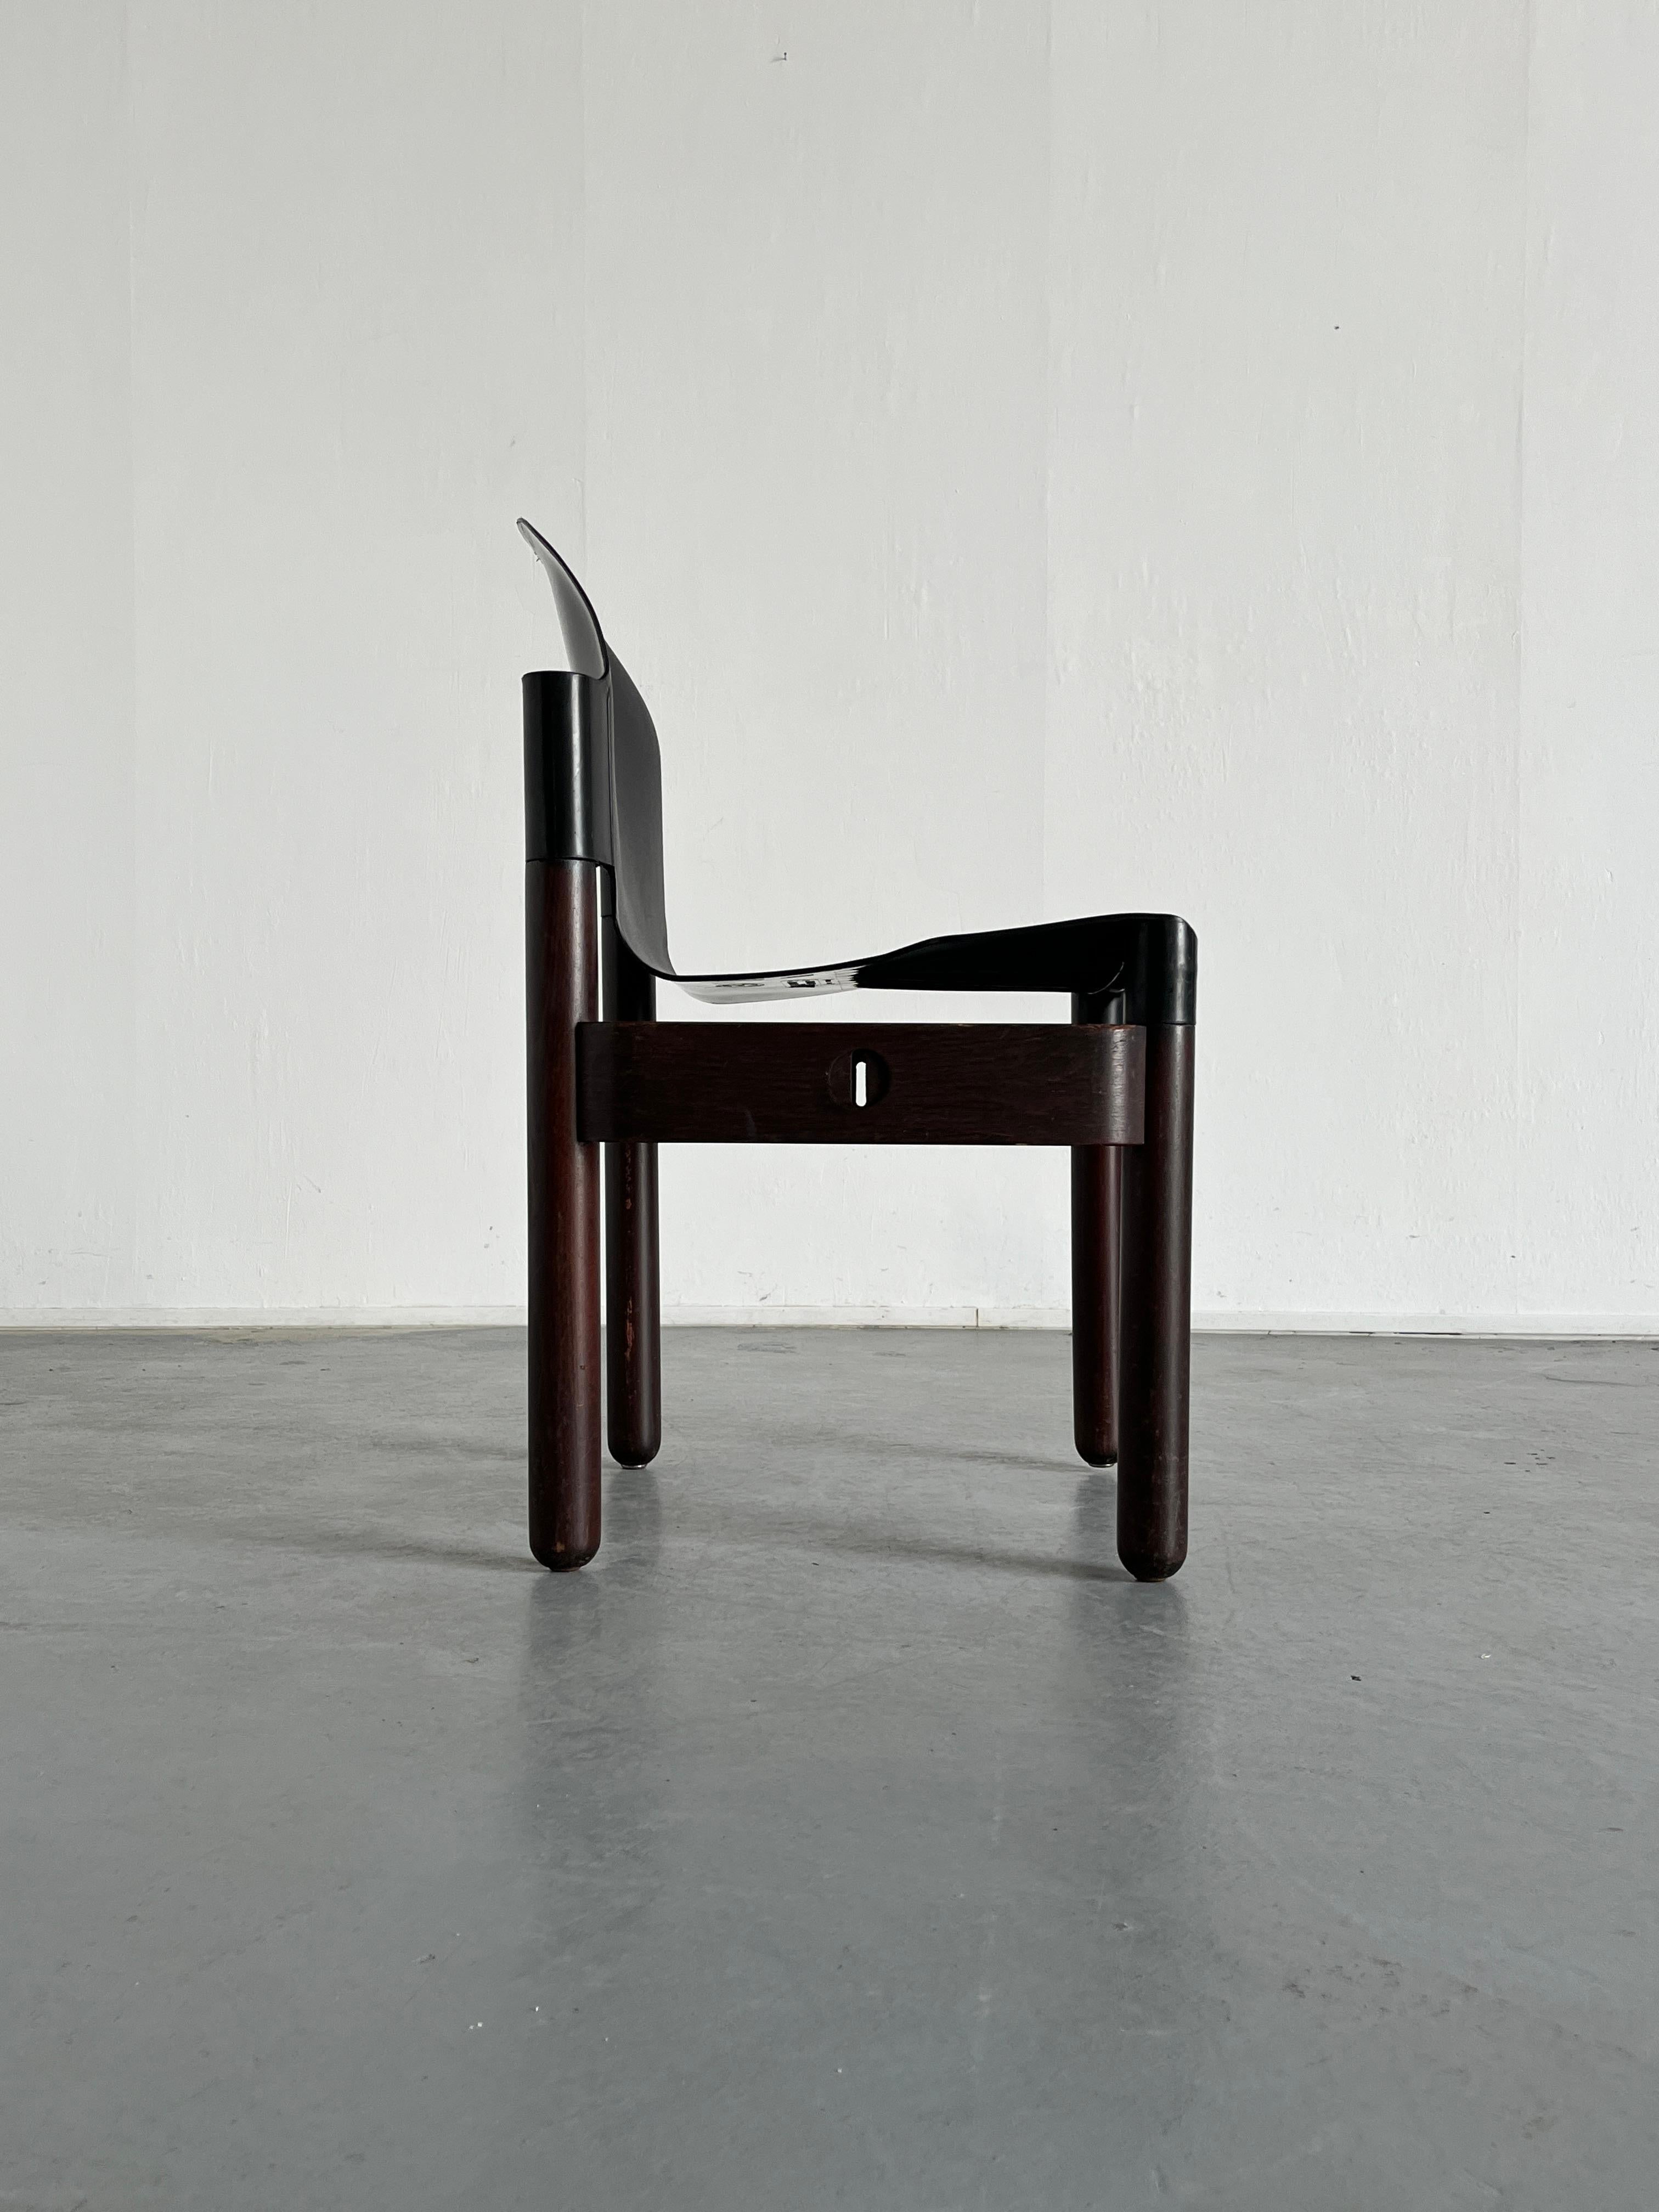 Late 20th Century Vintage Black Thonet Flex 2000 Chair by Gerd Lange for Thonet, 1980s For Sale